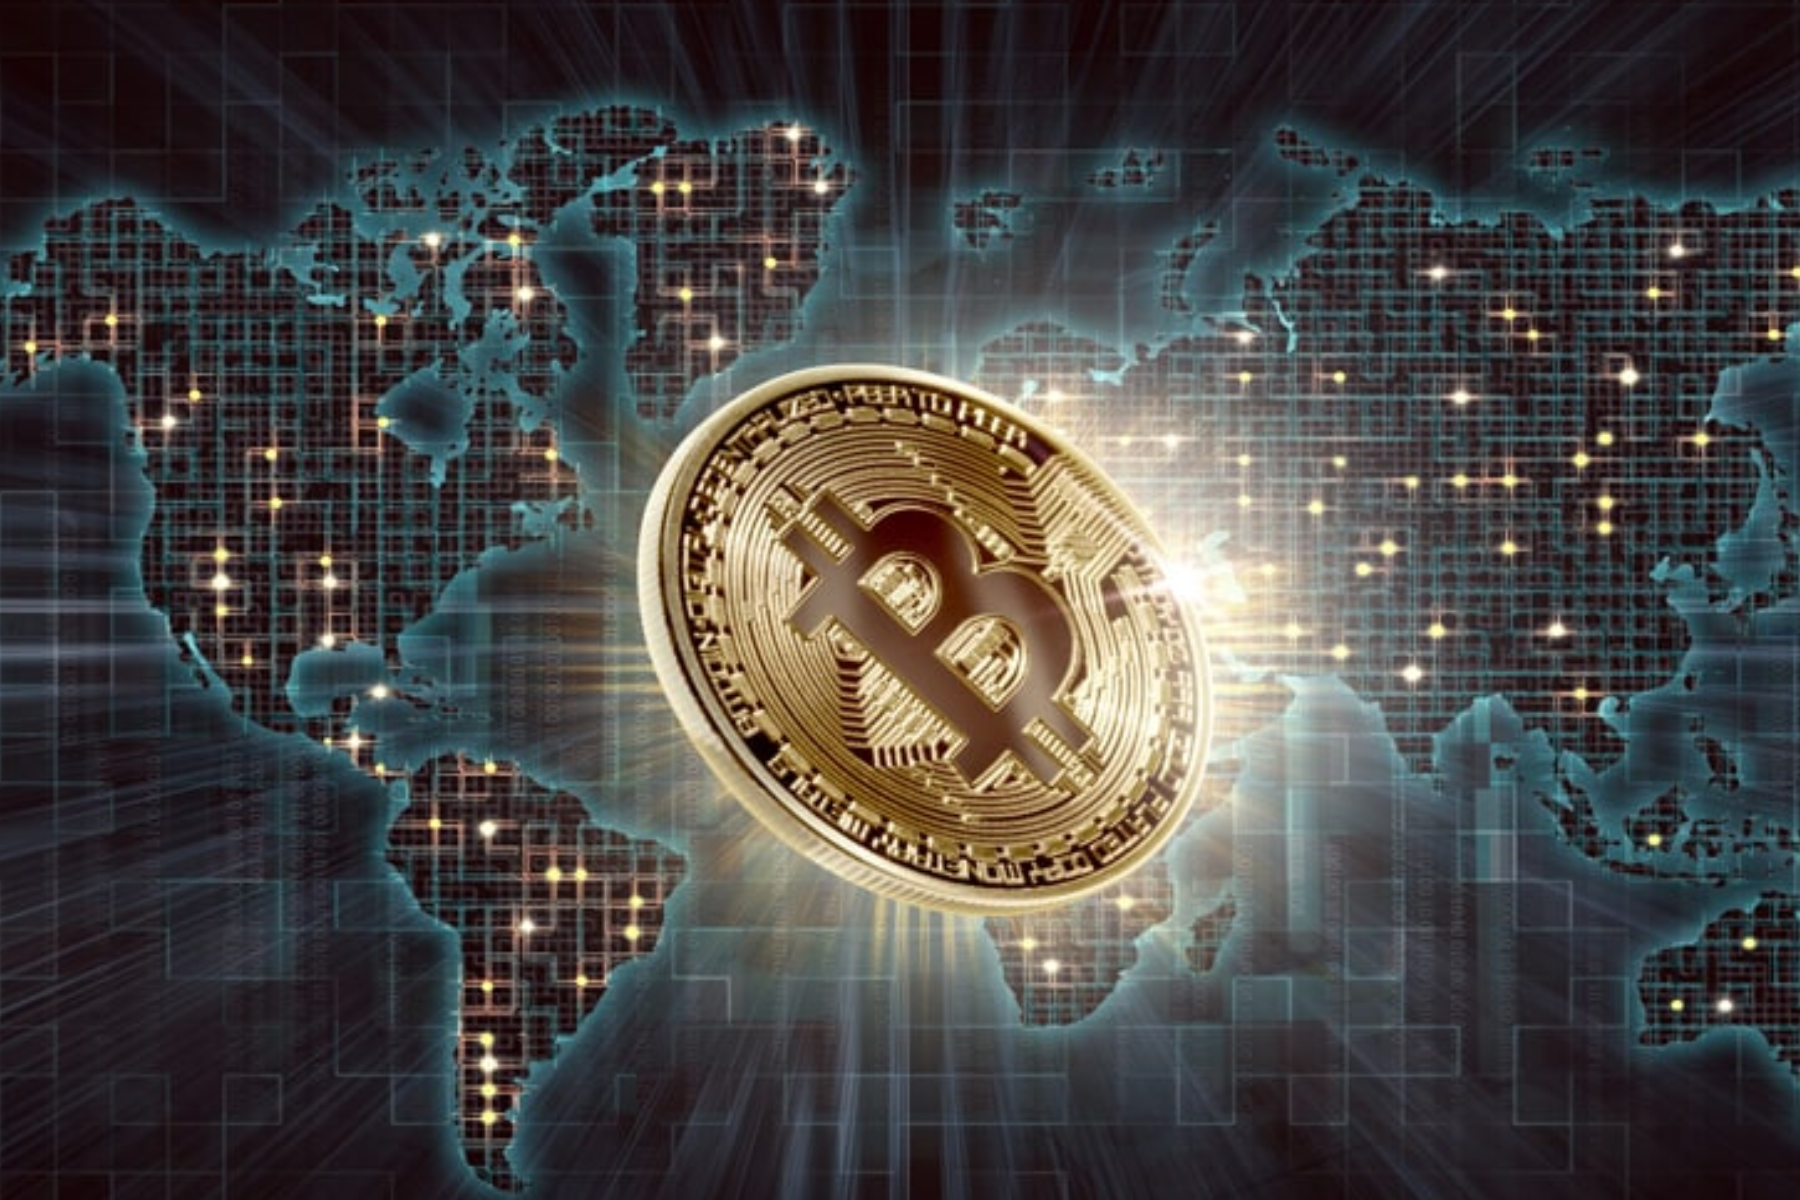 A close-up photograph of a shiny, golden Bitcoin is placed on top of a map background